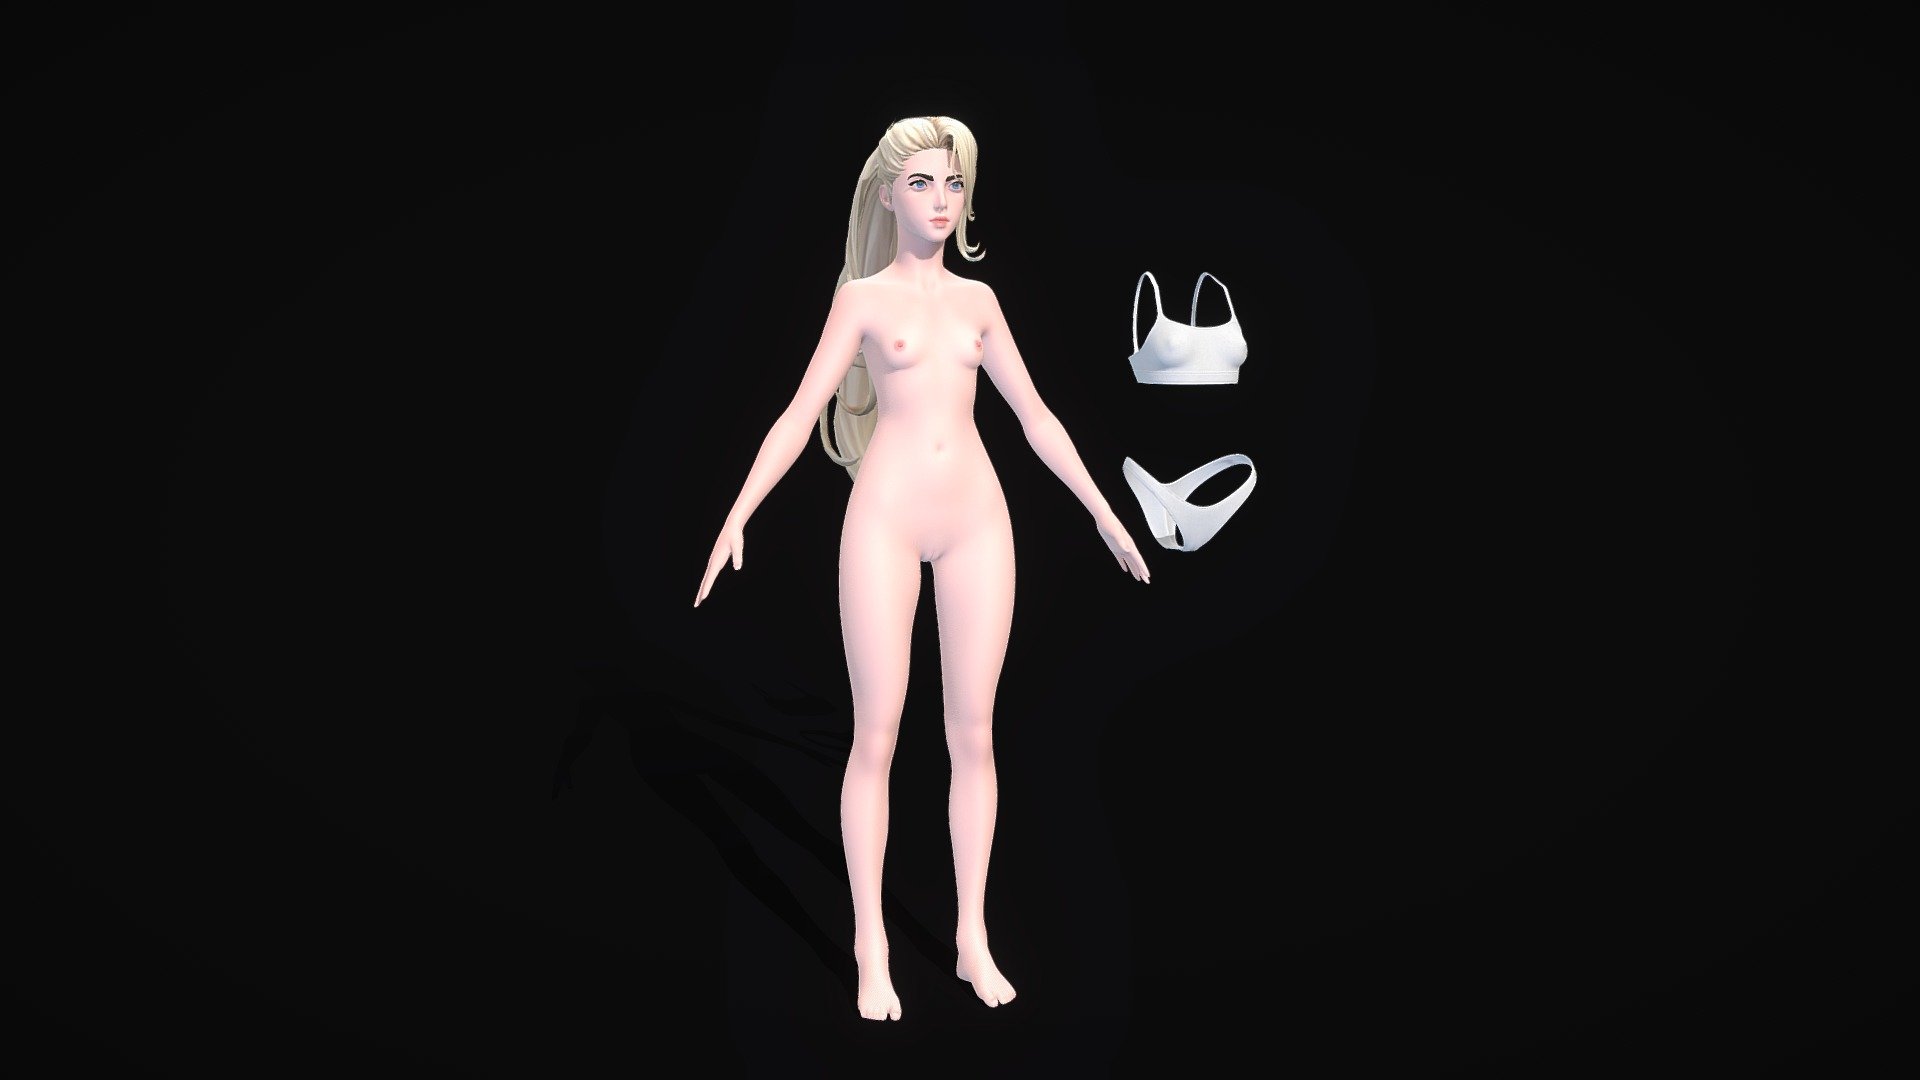 Stylized Petite Nude Female Type 2

https://www.artstation.com/waterfowl

Clean Topology

Semi-Modeled Adult Parts

Basic Underwear

UV Mapped

Textured

Hair, Eyes, Eyebrow/Eyelash, Underwear Meshes All Included. No Teeth. Both .fbx and .obj File Formats.

VERTICES:

Female Body Mesh: 21,914

Hair: 2,991

Eyes: 602

Eyebrow/Eyelash: 1,042

Underwear: 9,835

TEXTURES:

Female Body: 4k Unity HDRP Texture Set

Hair : 1k Albedo Map

Eyes: 2k Albedo Texture

Eyebrow/Eyelash: none

Underwear: 4k Unity HDRP Texture Set - Stylized Petite Nude Female Type 2 - 3D model by Waterfowl Games (@WaterfowlGames) 3d model